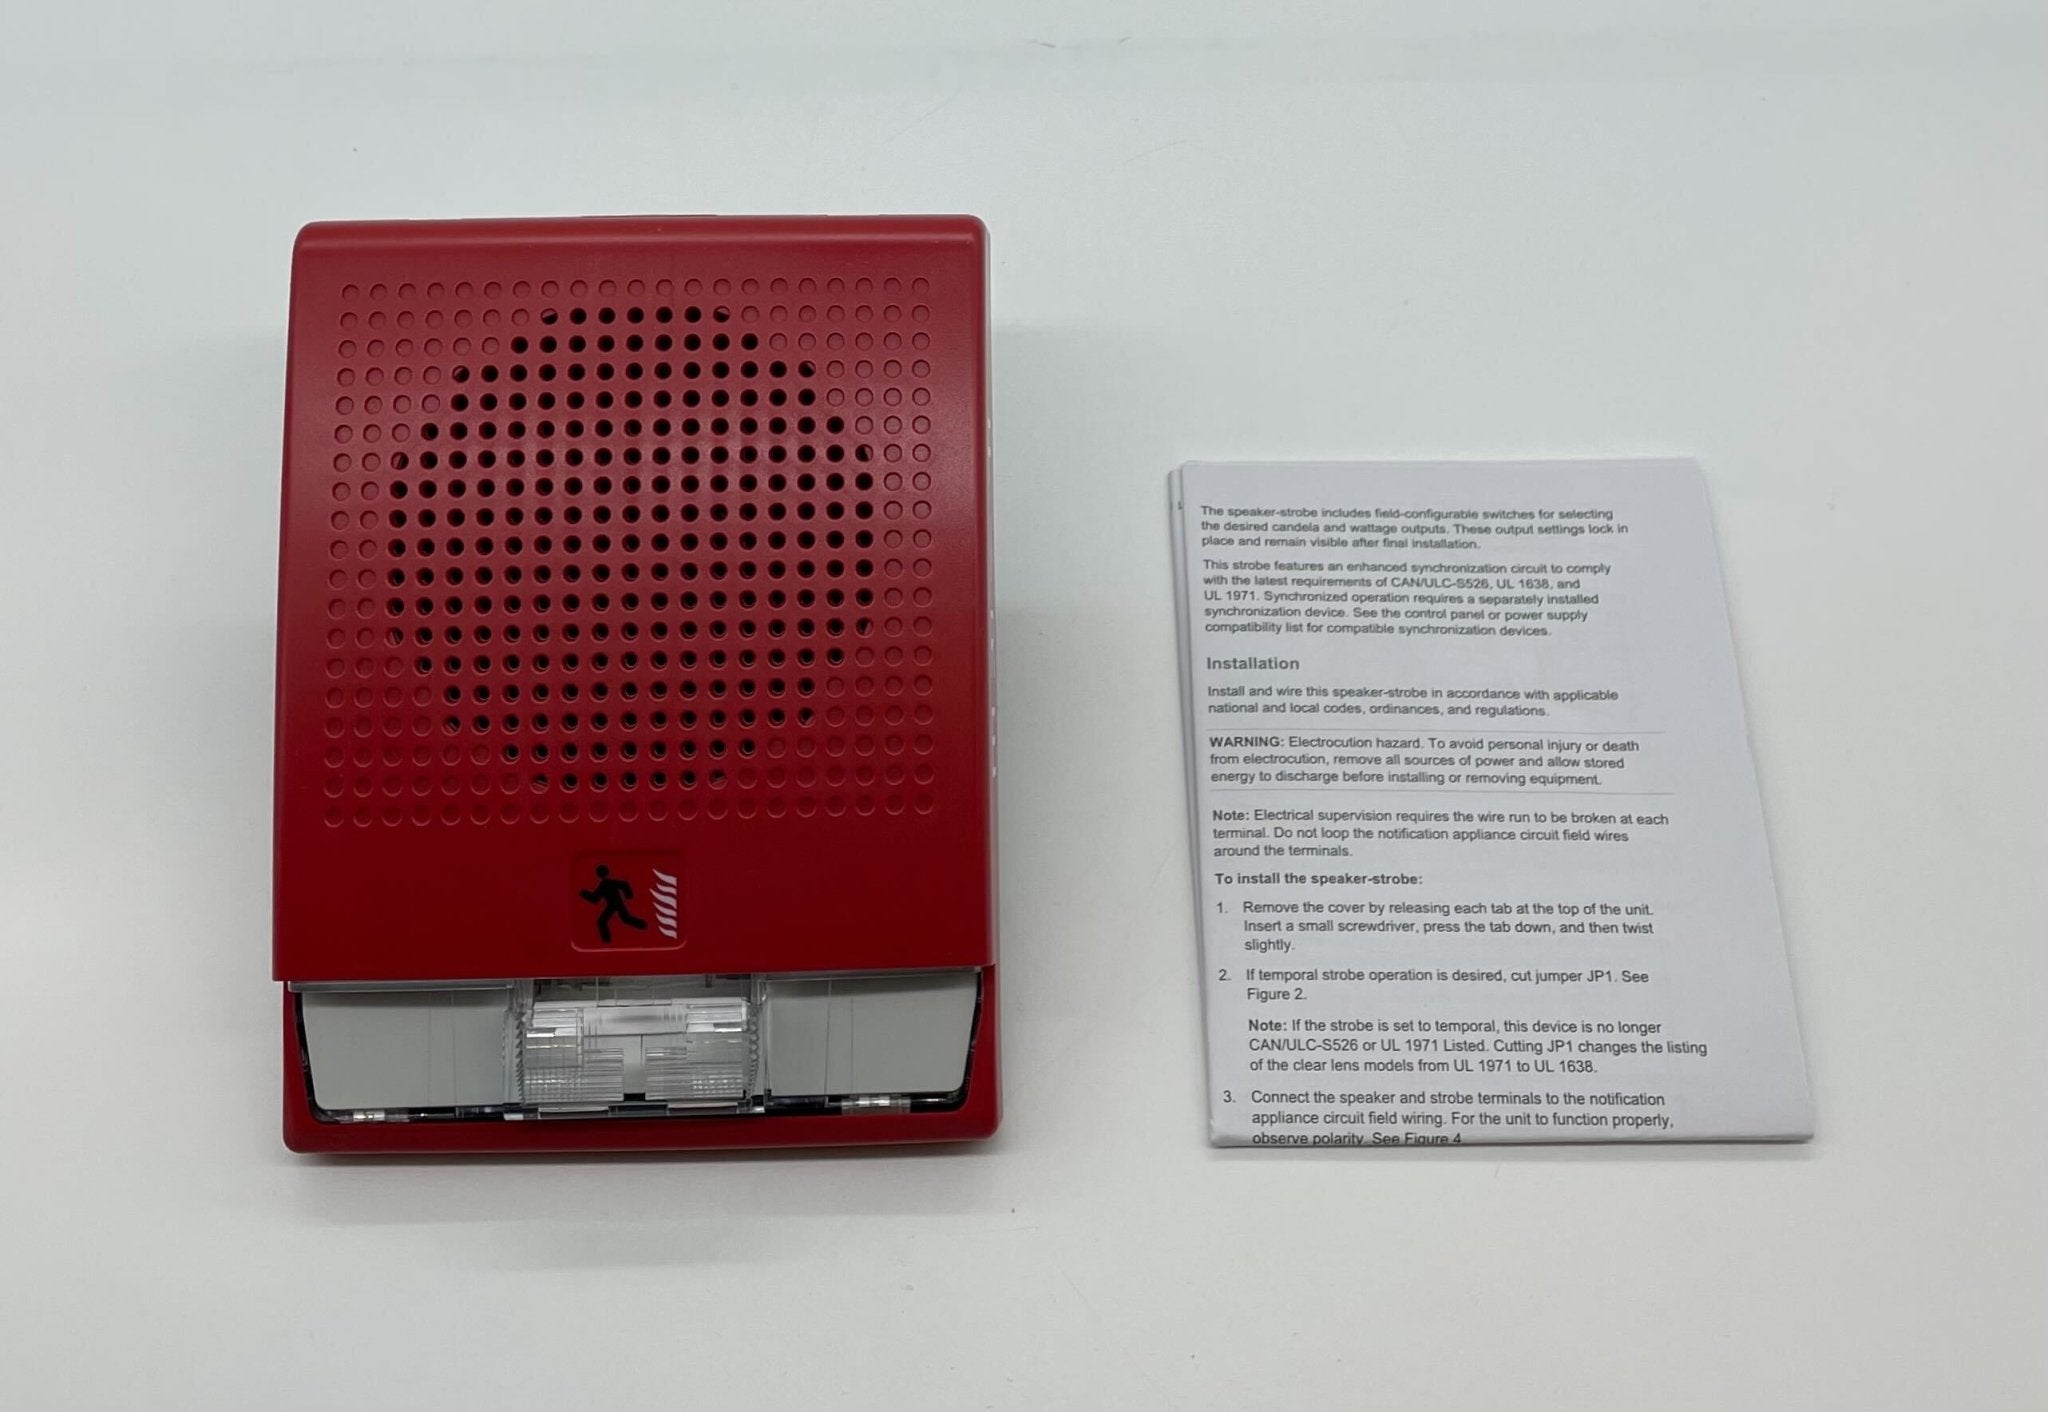 Edwards G4HFRF-S2VMC - The Fire Alarm Supplier